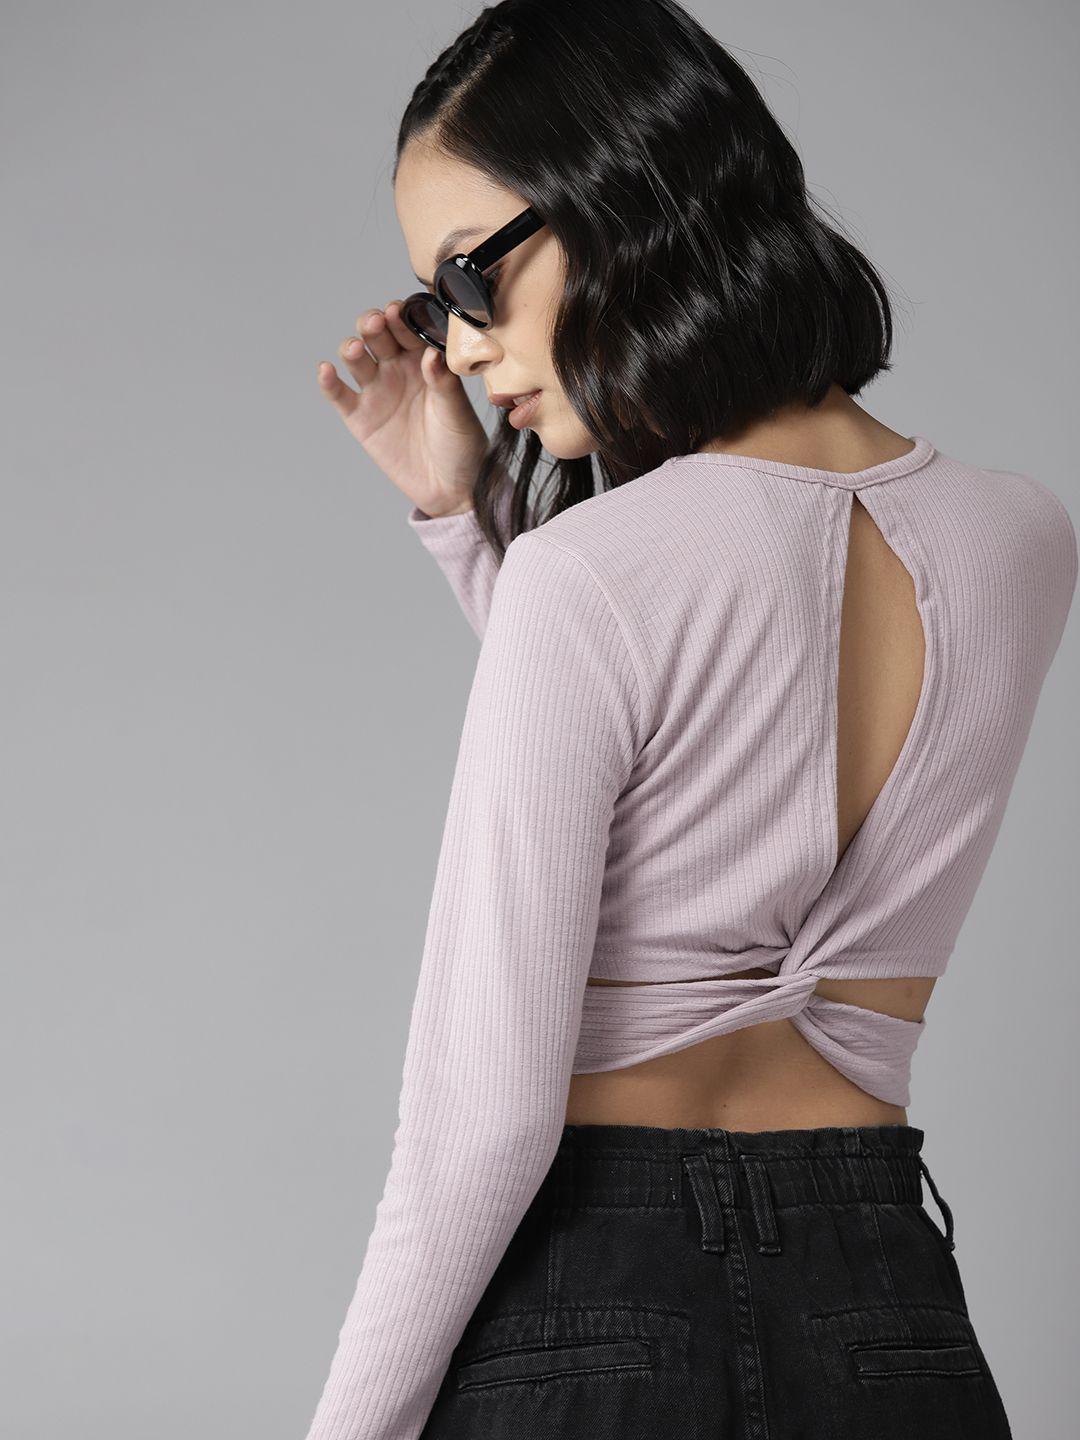 the roadster lifestyle co. cut-out & twisted detail styled back top